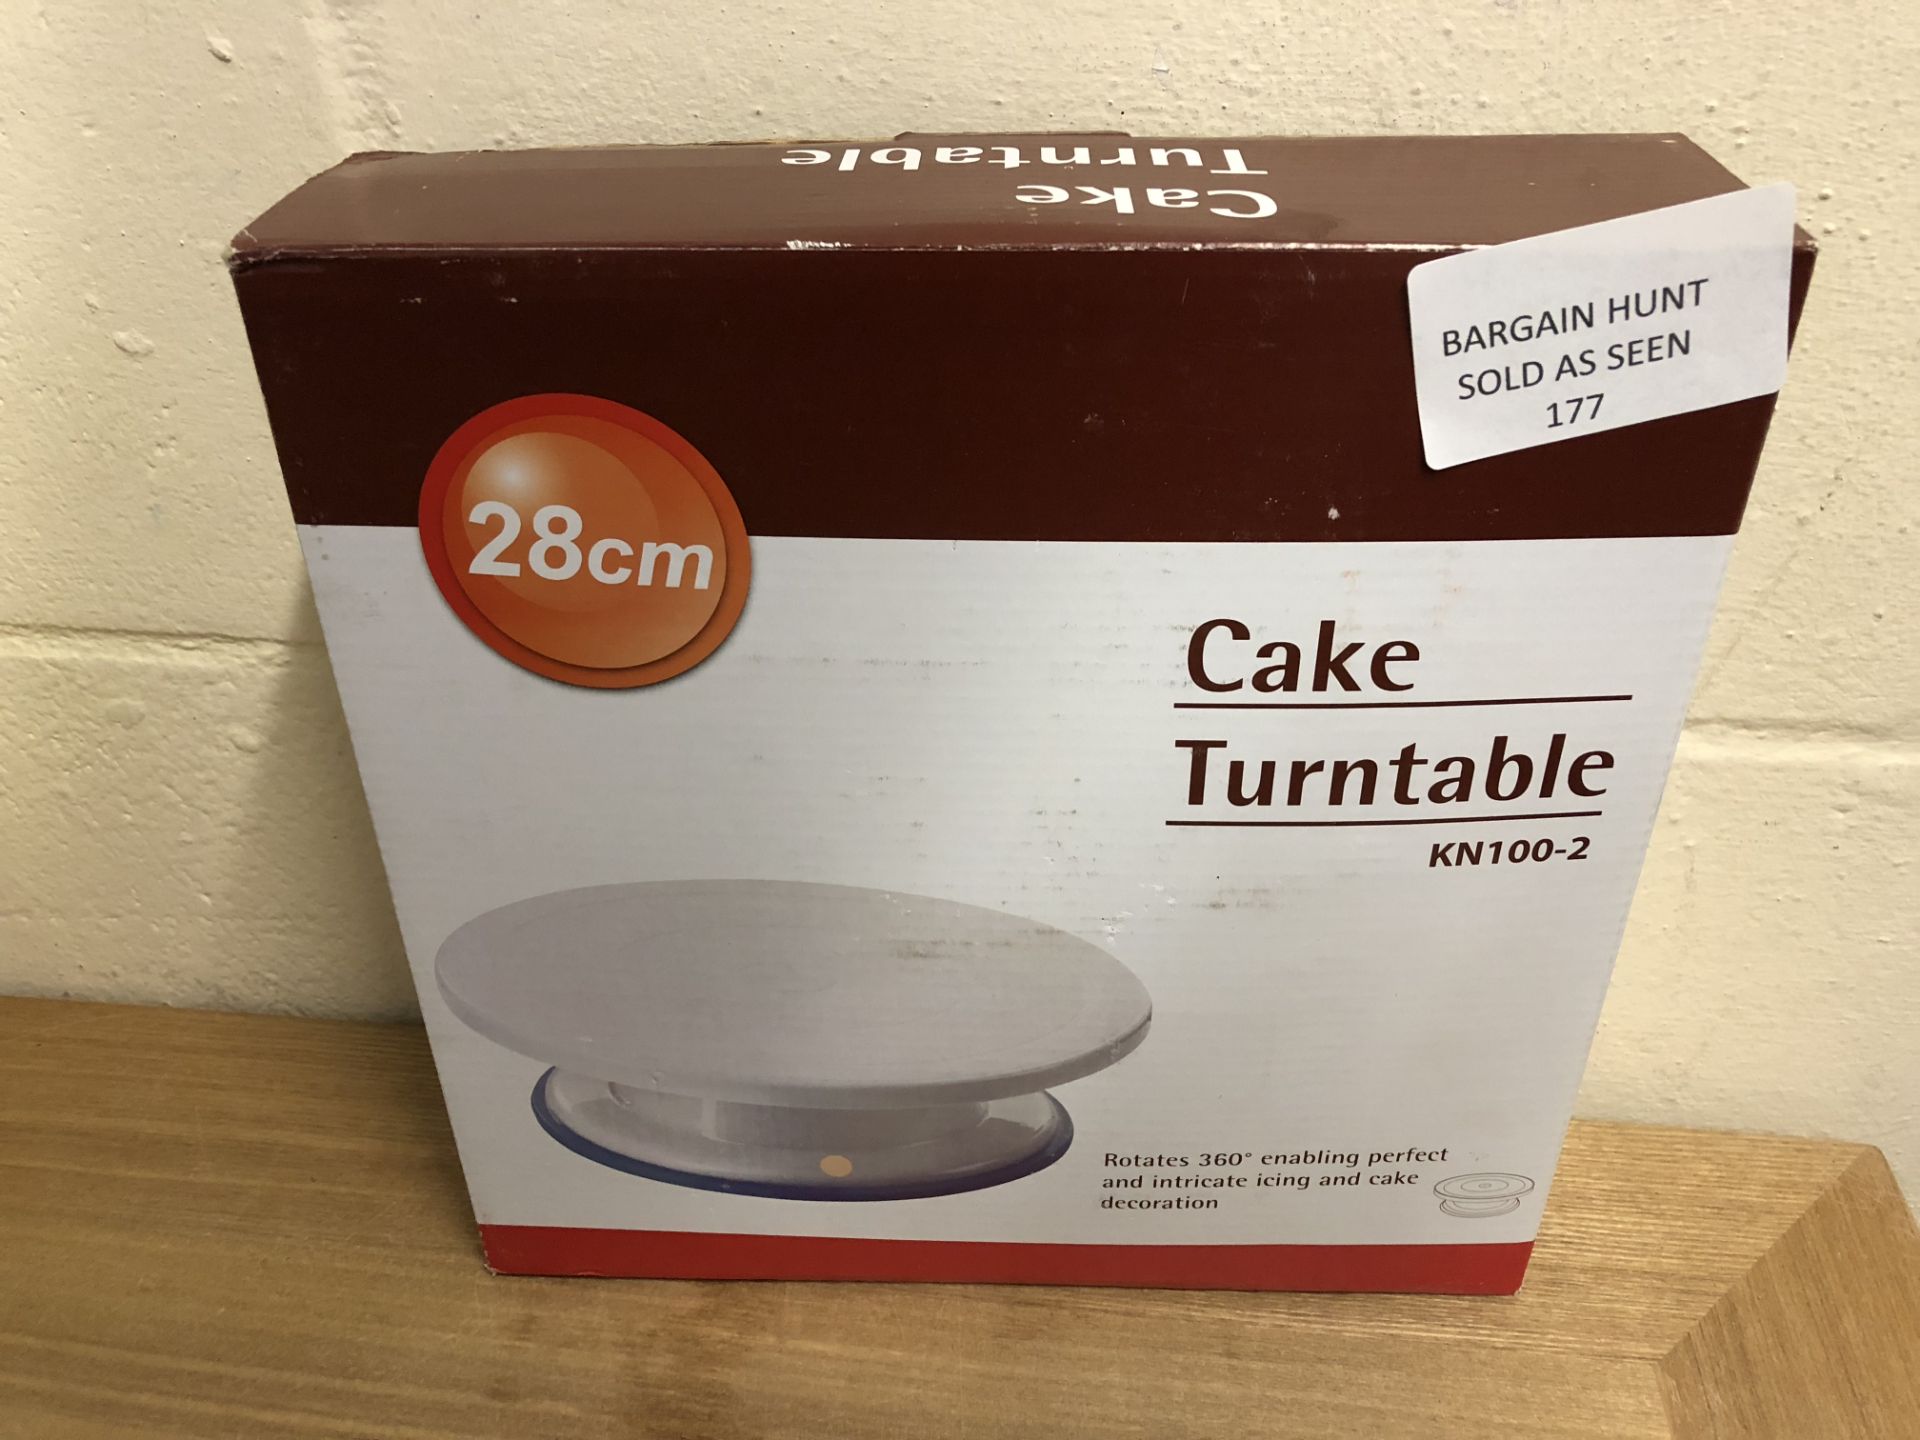 Cake Turntable-Enabling Perfect and intricate Icing and Cake Decoration